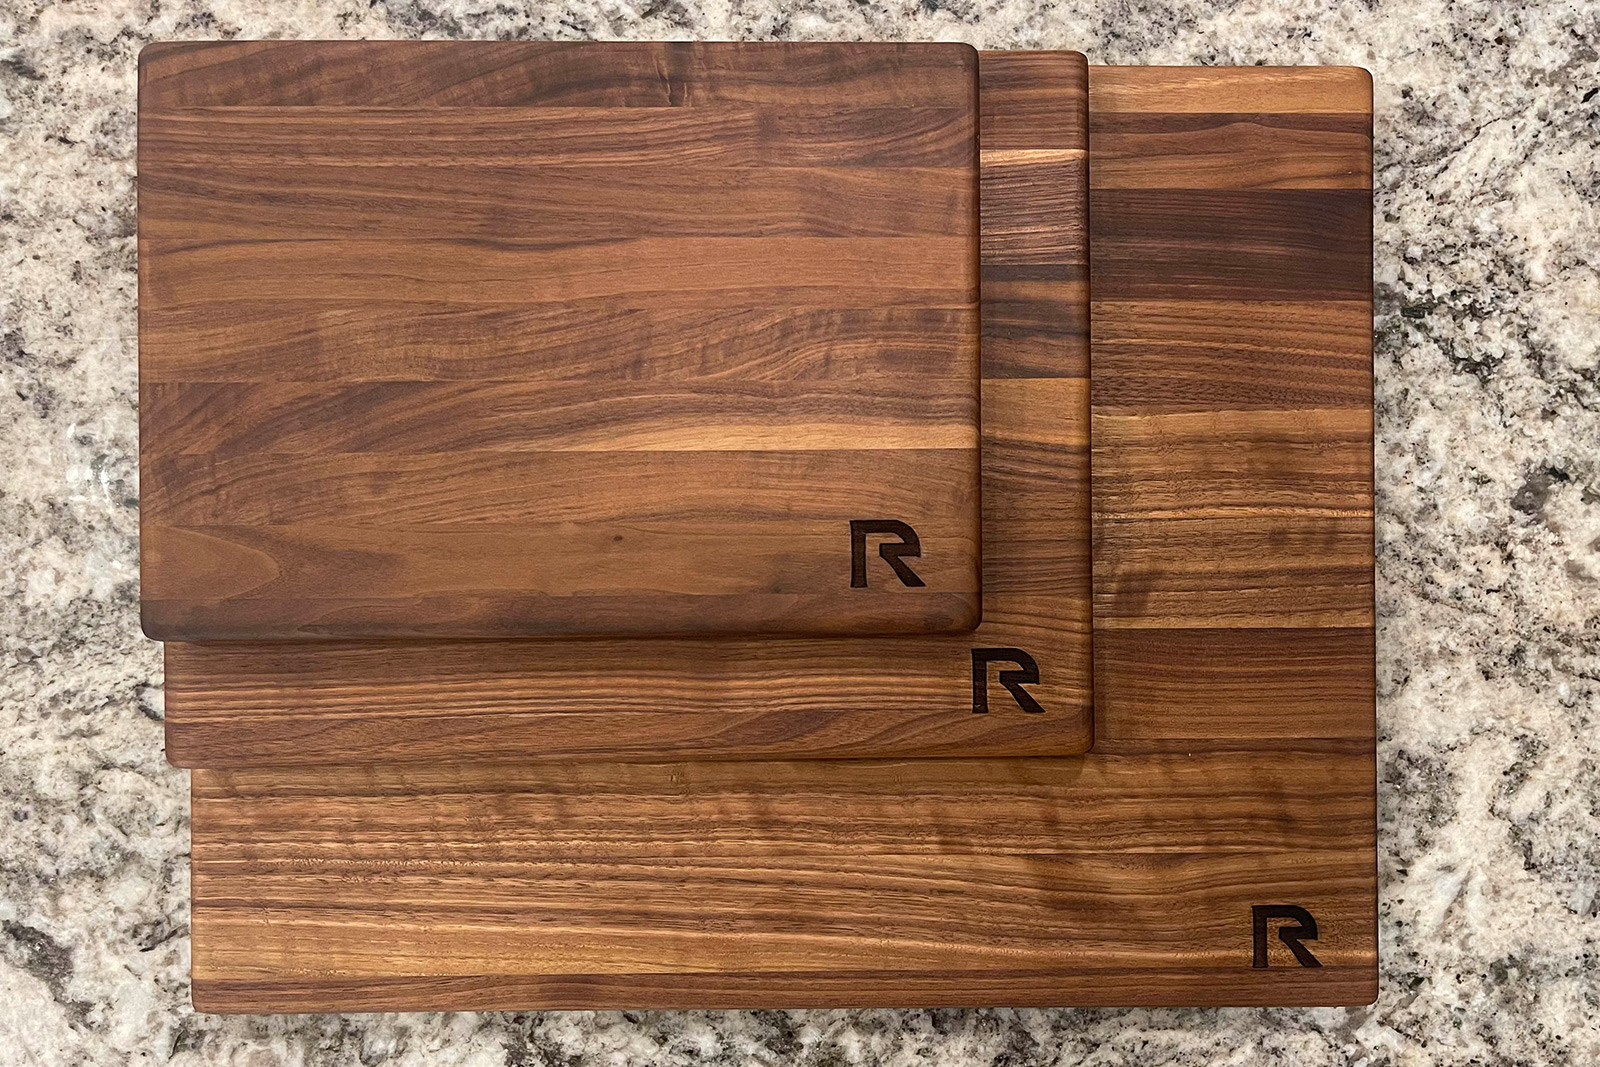 RoseWood & Co Cutting board set- Utility set is heavy duty for BBQ, brisket, grilling and will last a lifetime. Our cutting blocks are handmade in the US. Walnut wood cutting block set